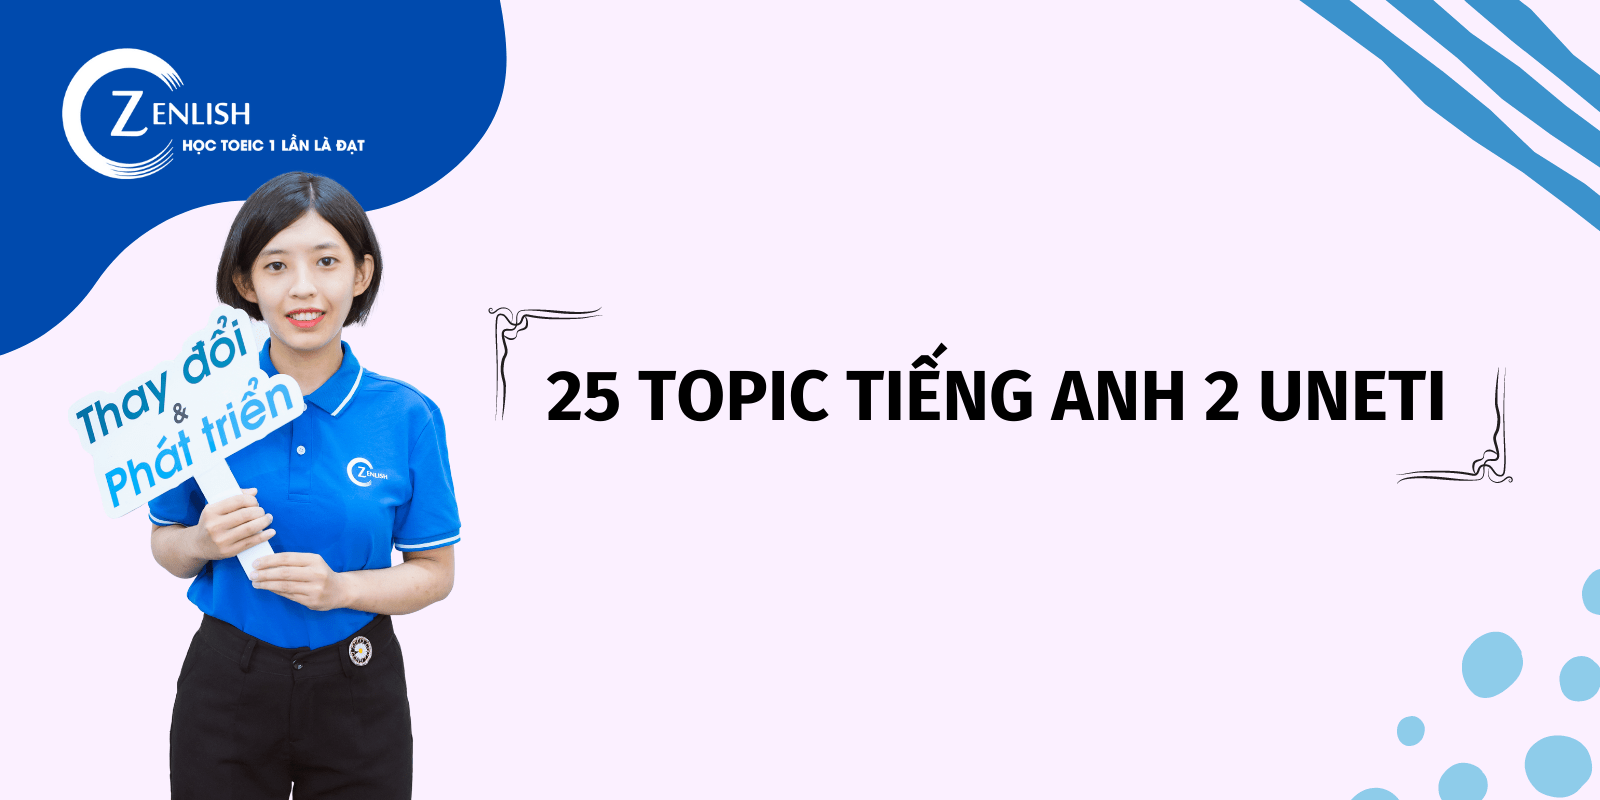 25 TOPIC TIẾNG ANH 2 UNETI